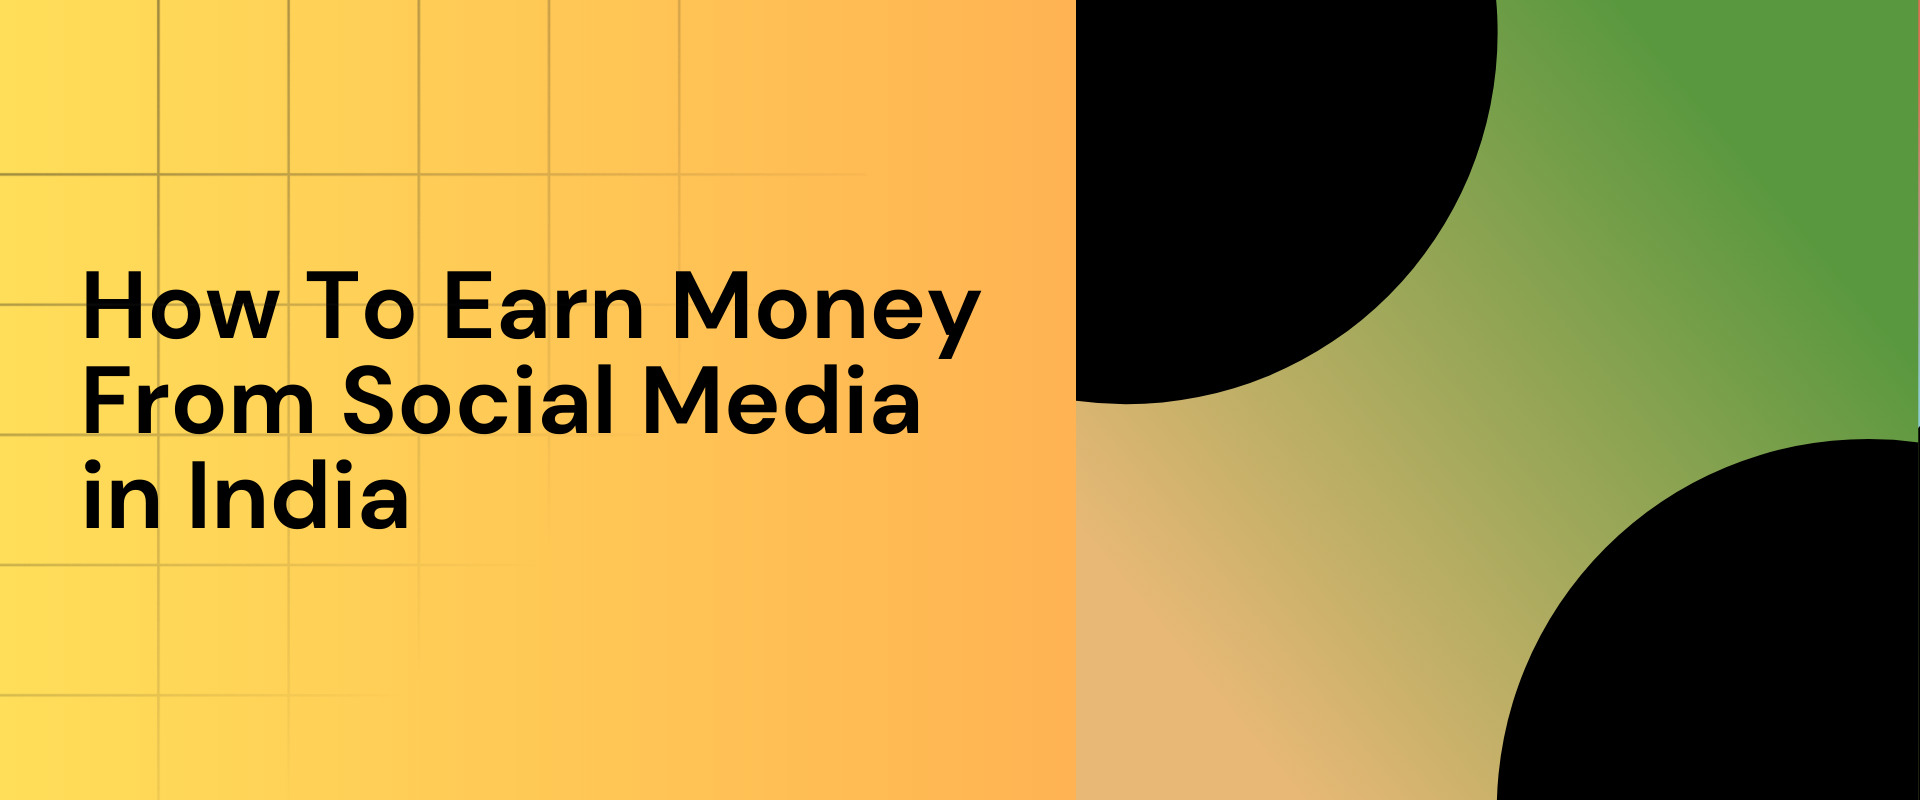 How To Earn Money From Social Media in India